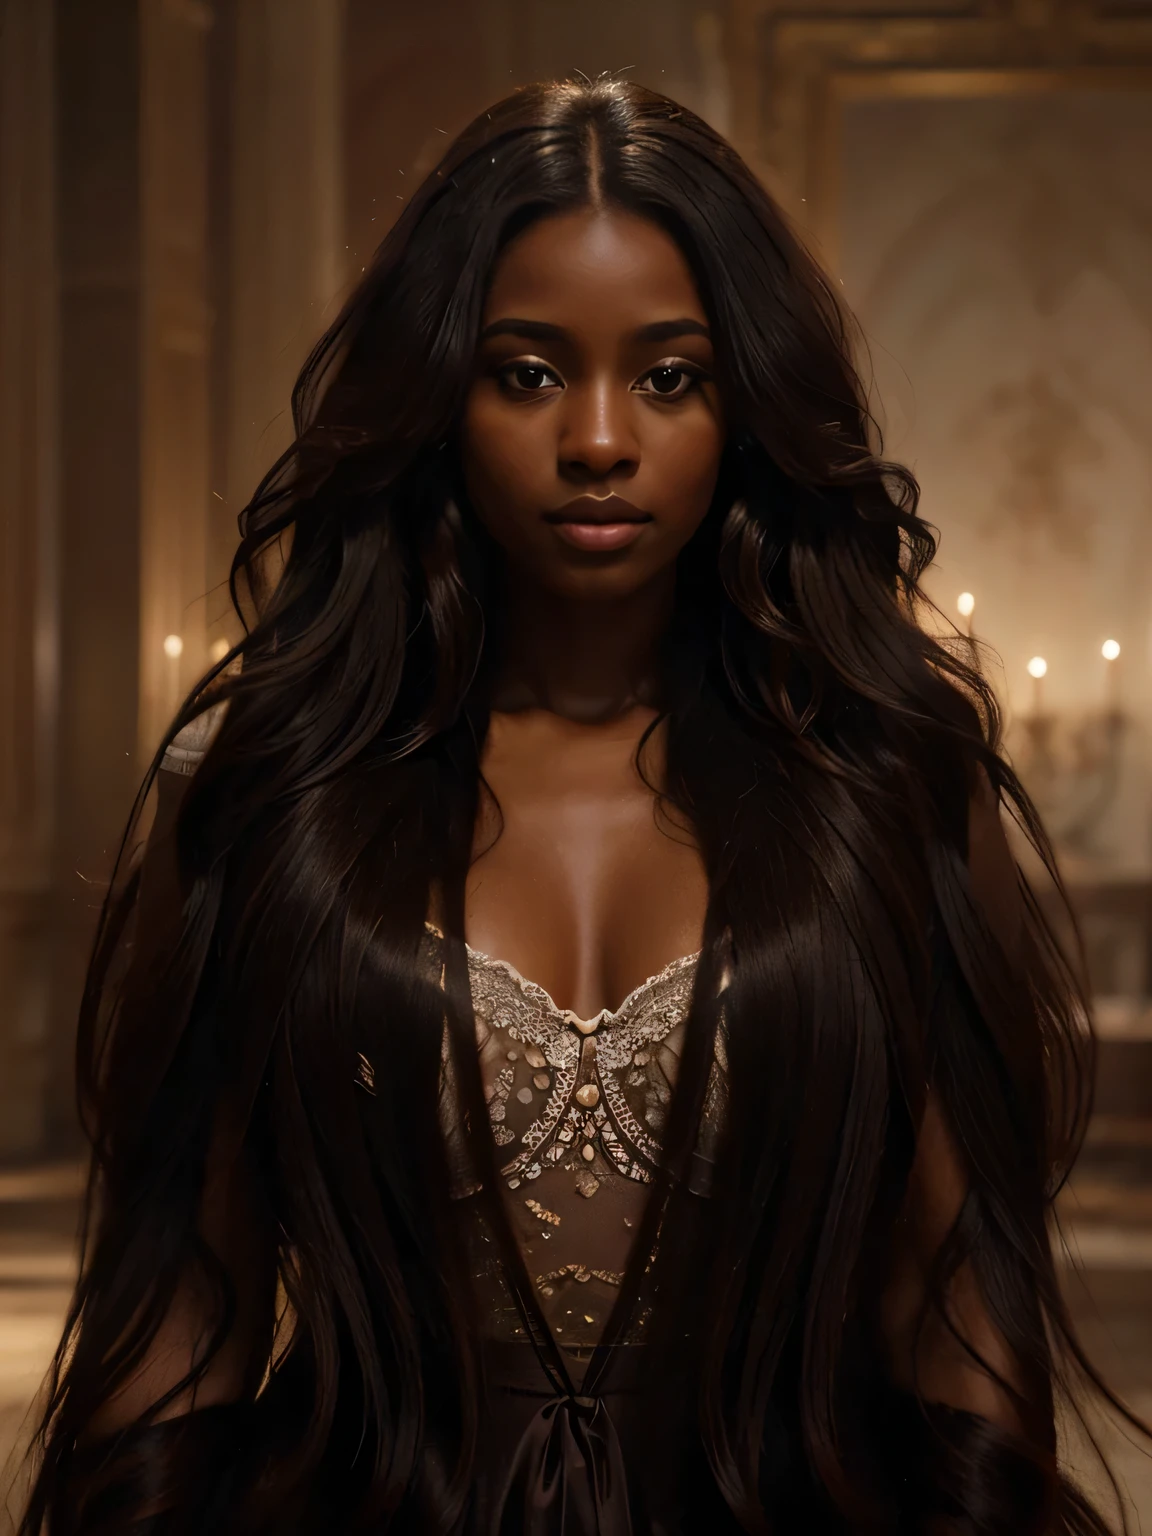 Generate hyper realistic image of a beautiful woman with hair resembling rich, velvety chocolate. Picture her standing in a dreamlike setting, surrounded by soft, ethereal lighting that accentuates the luscious chocolate tones of her hair. The dreamy atmosphere enhances her beauty, creating a captivating scene that transports viewers to a Spanish castle